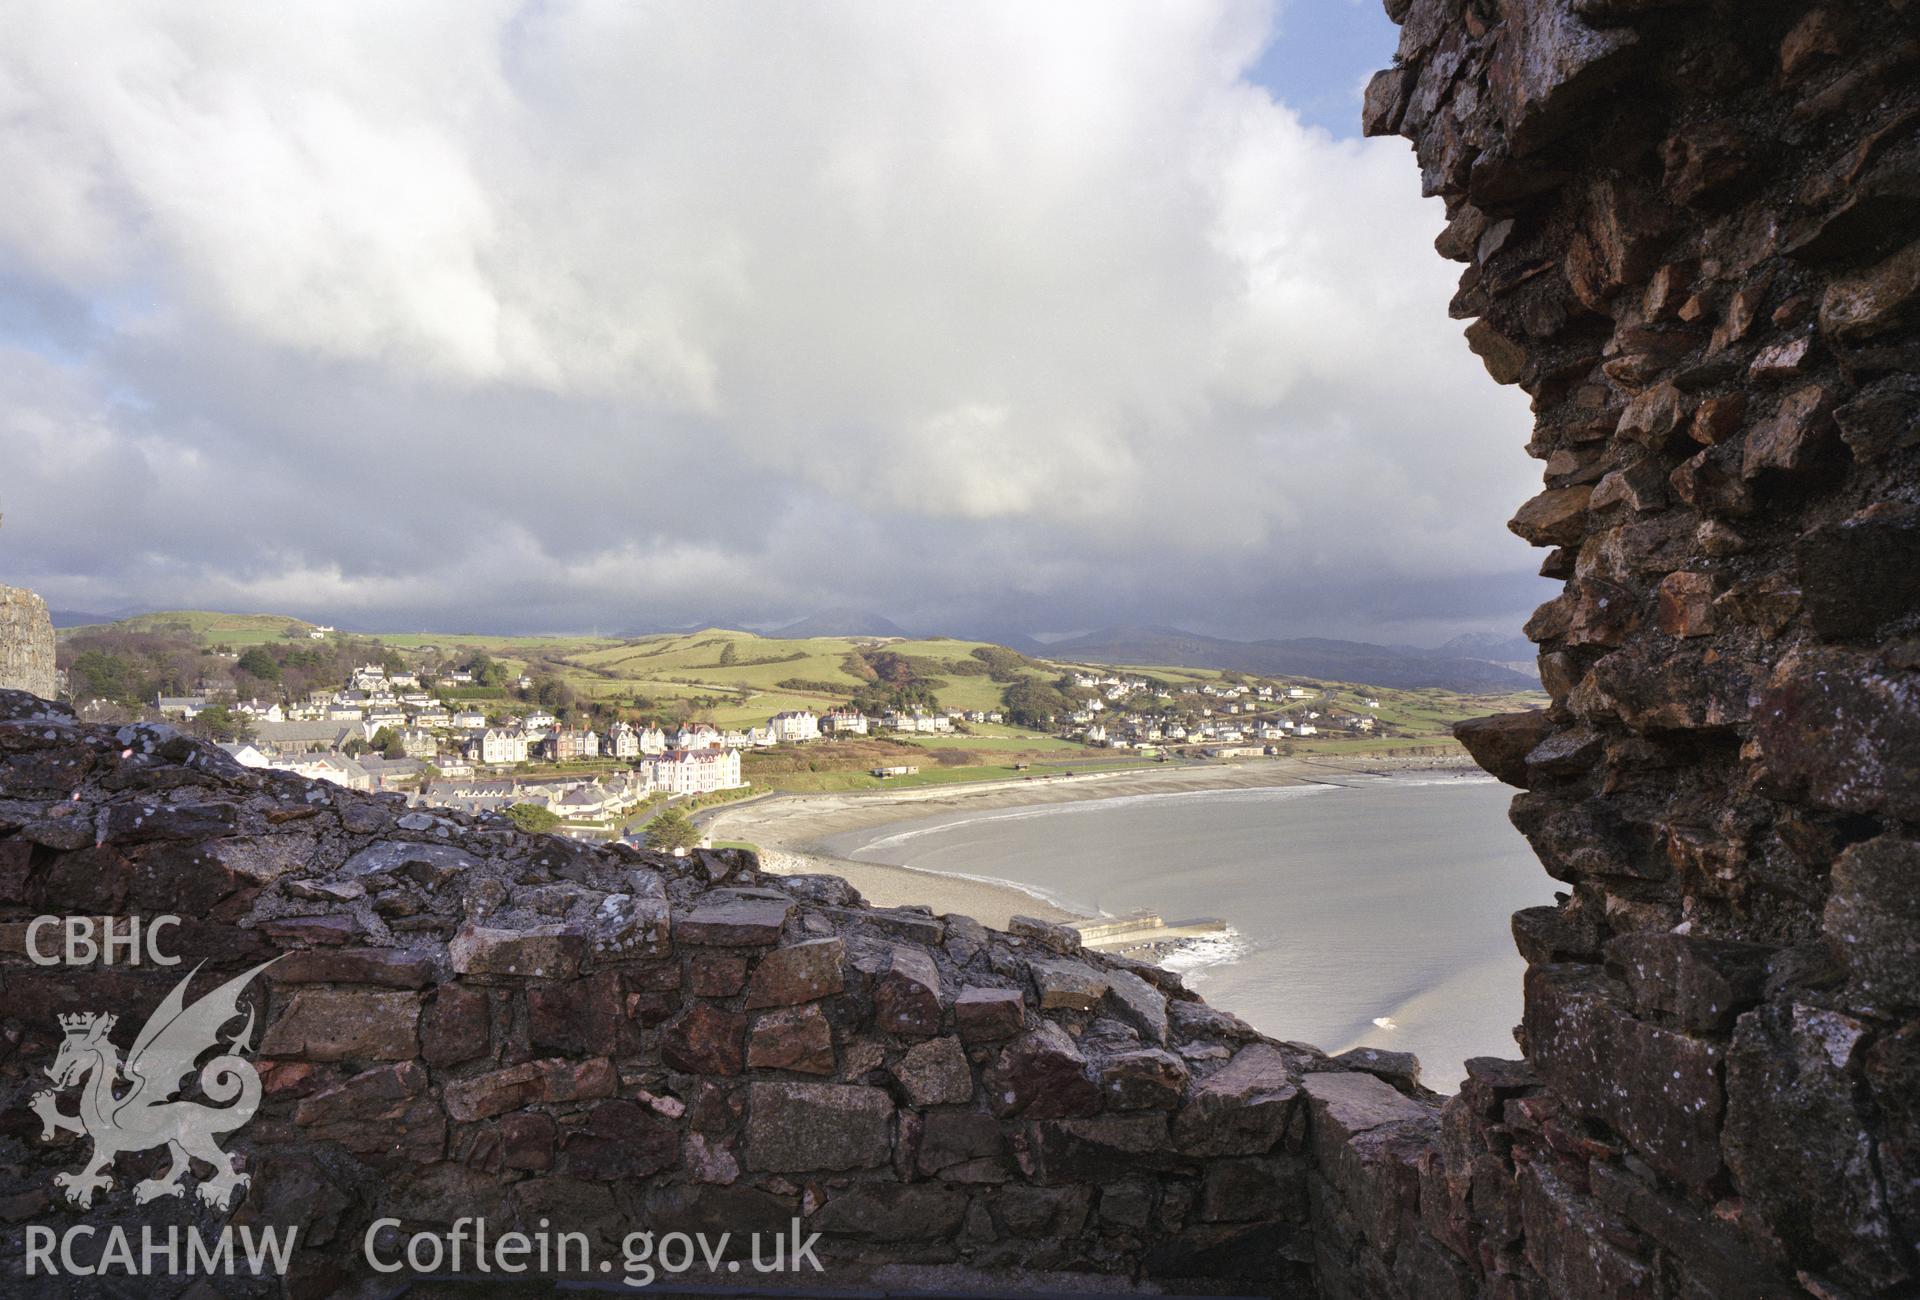 View of Criccieth from the castle